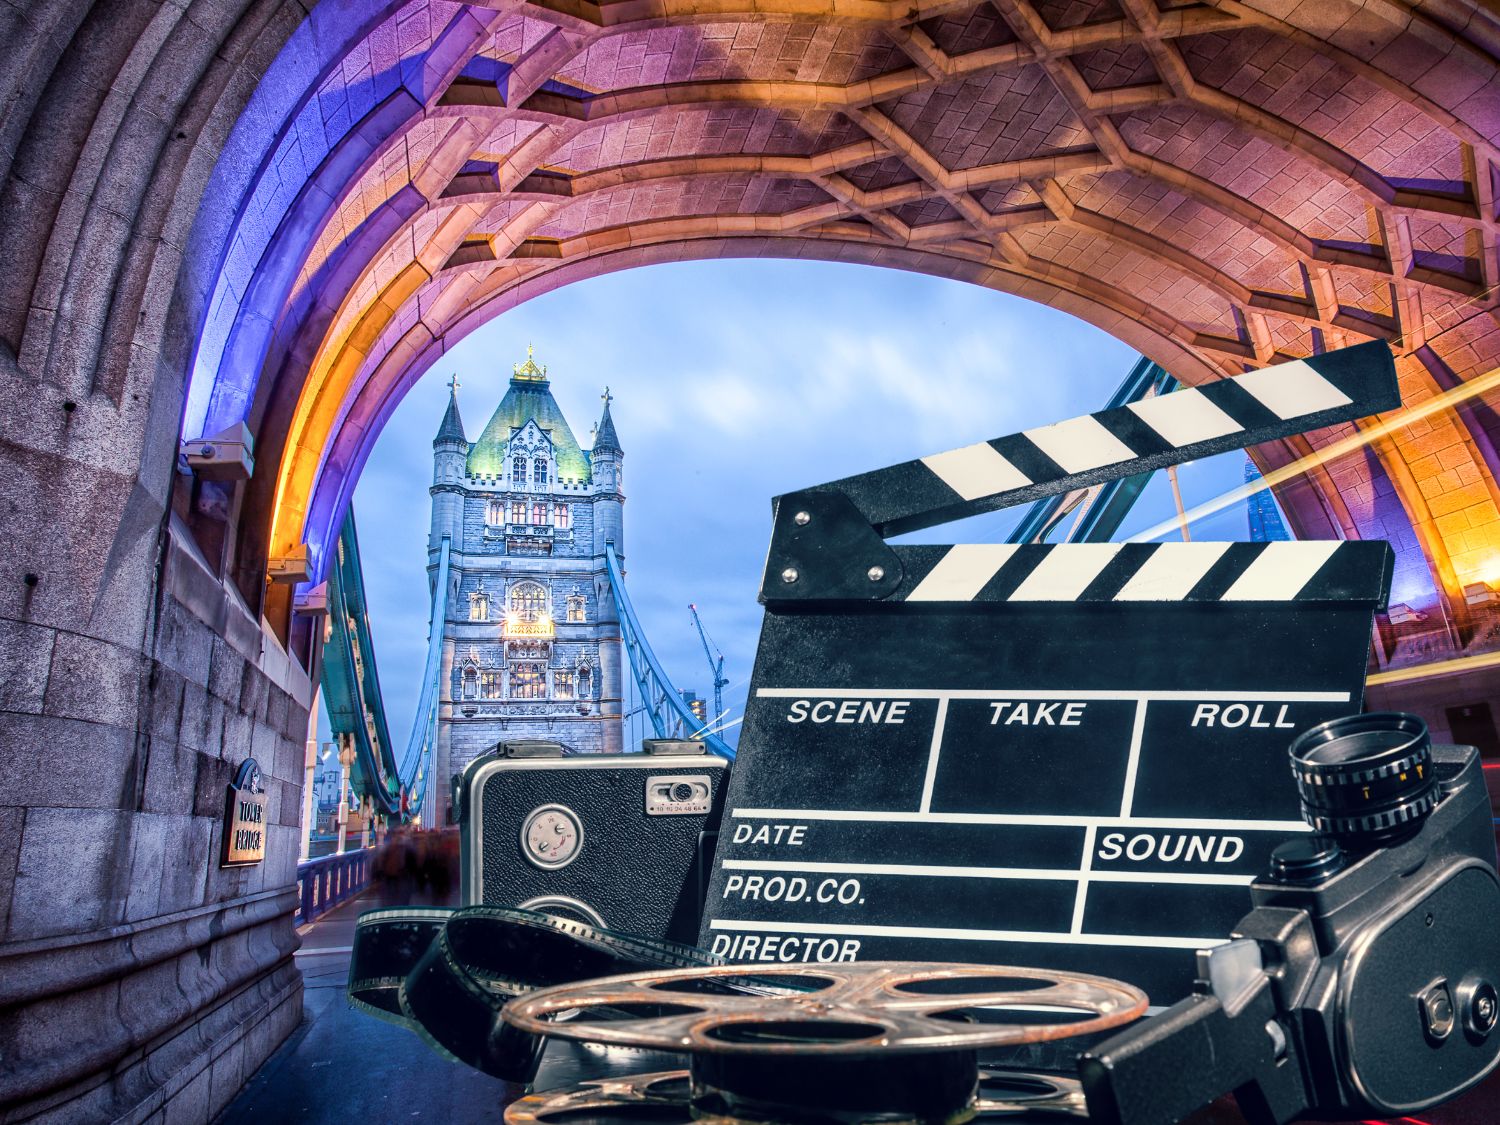 10 Extraordinary Movies Set In London That Will Inspire You To Visit!